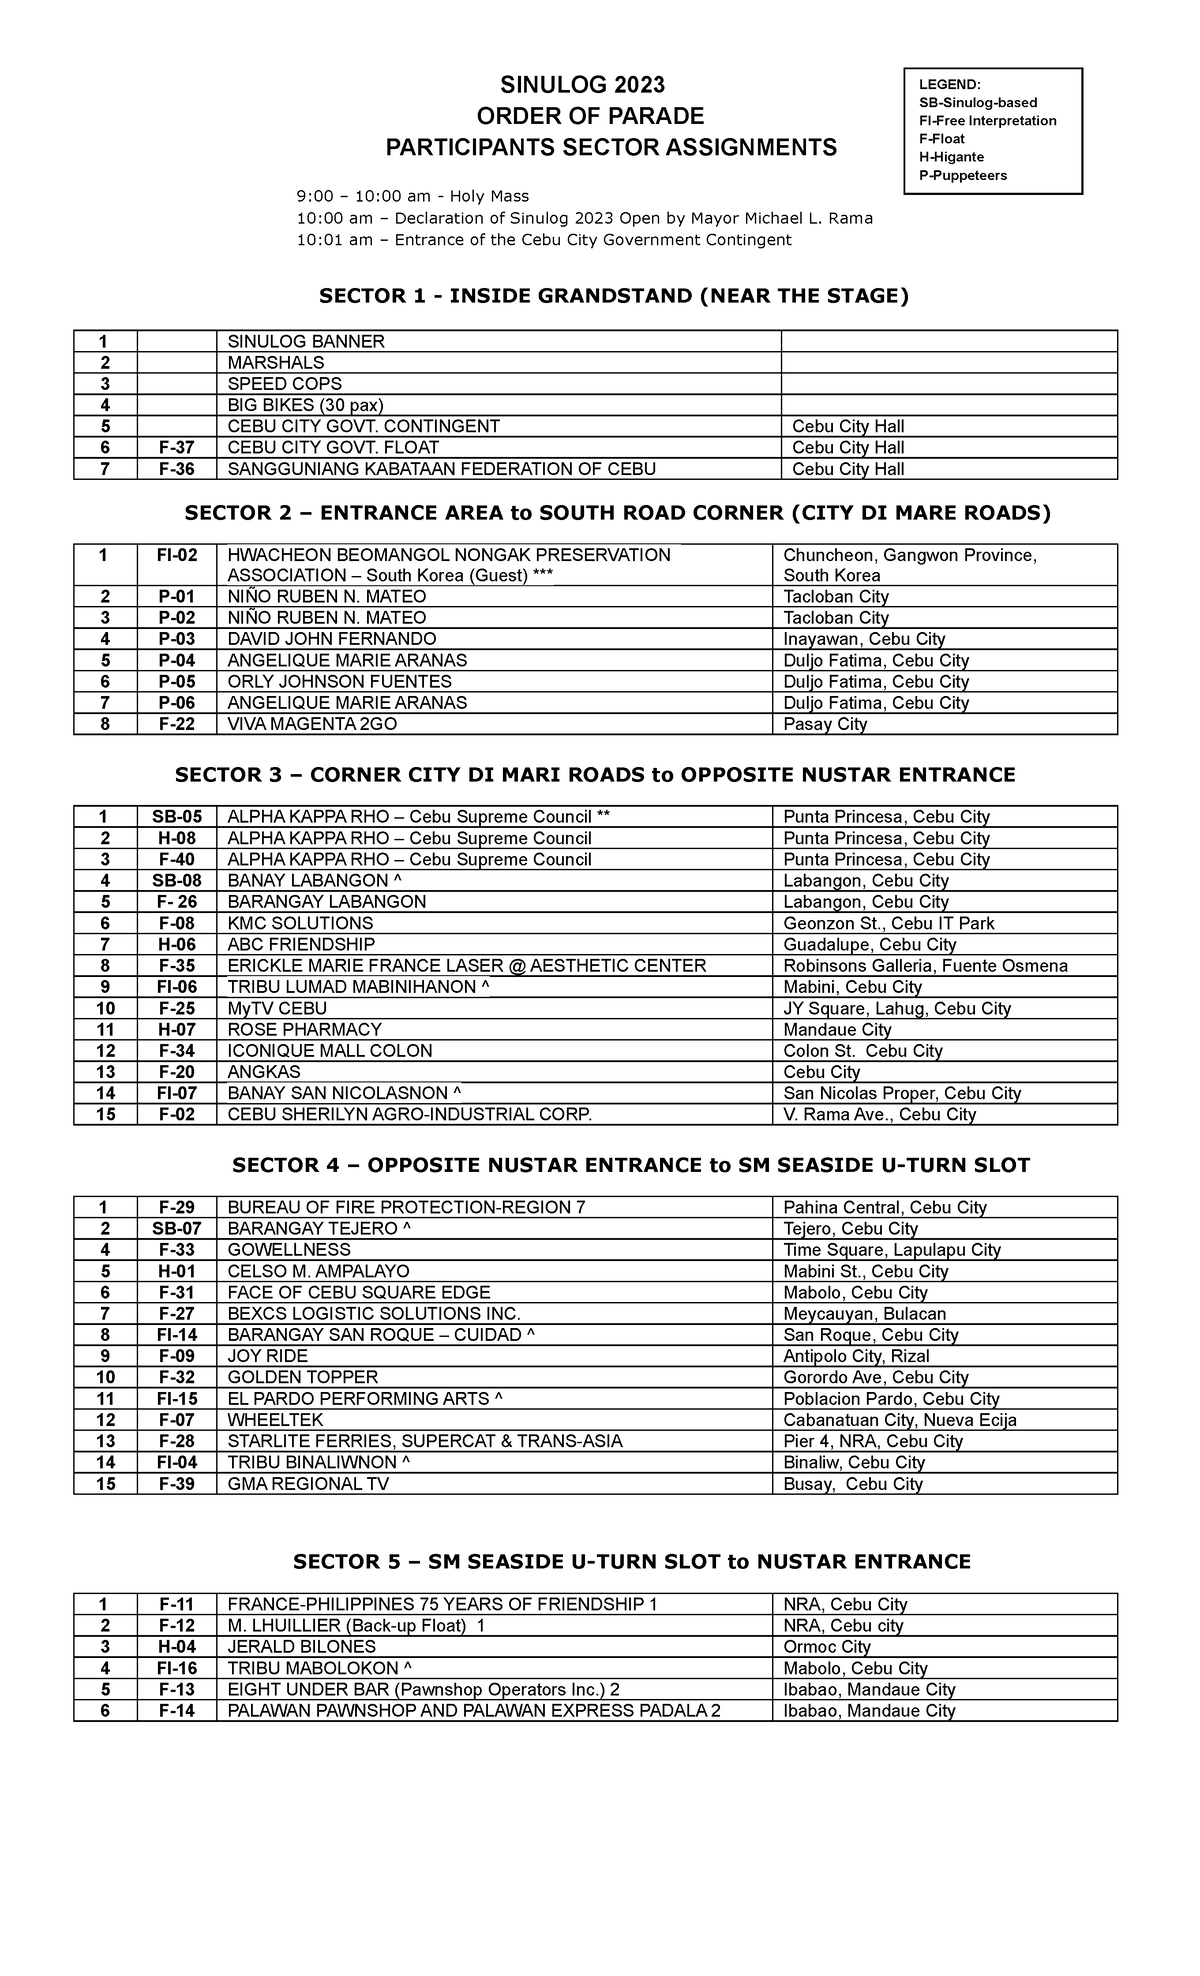 Sinulog-LIST-OF- Participants BY- Sector Final - SINULOG 2023 ORDER OF ...